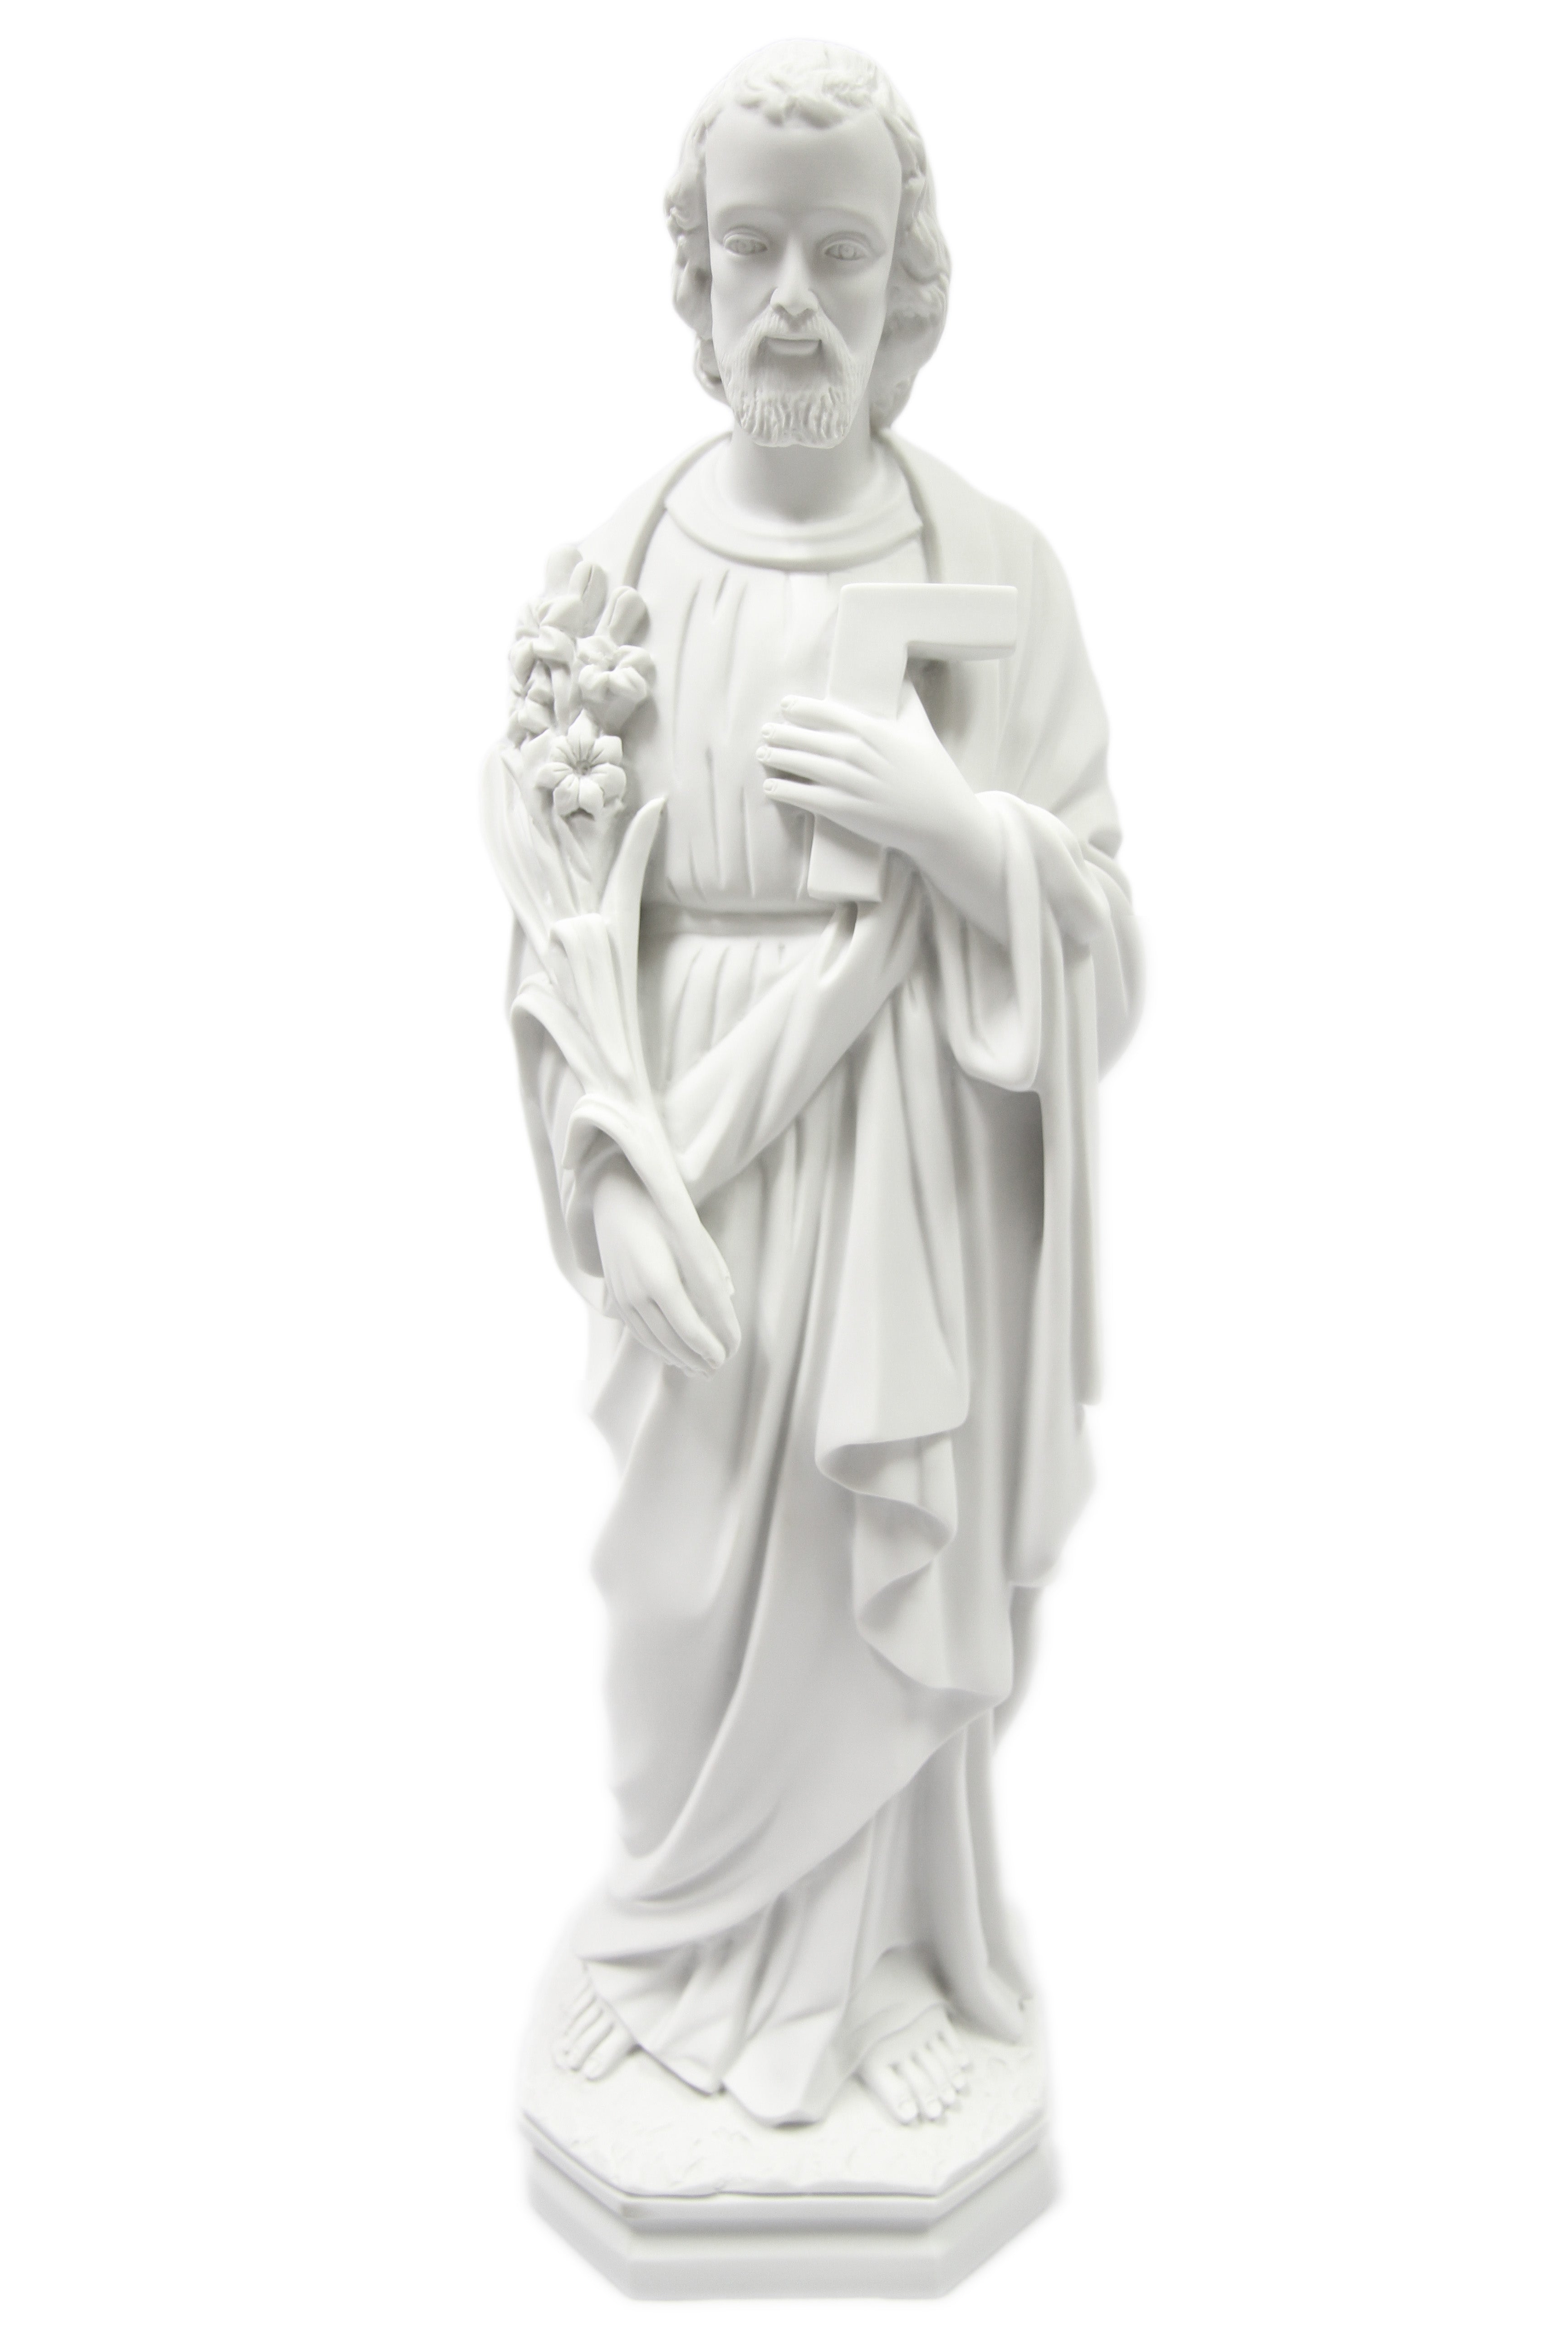 24 Inch Saint St Joseph the Worker Catholic Statue Sculpture Vittoria Collection Made in Italy